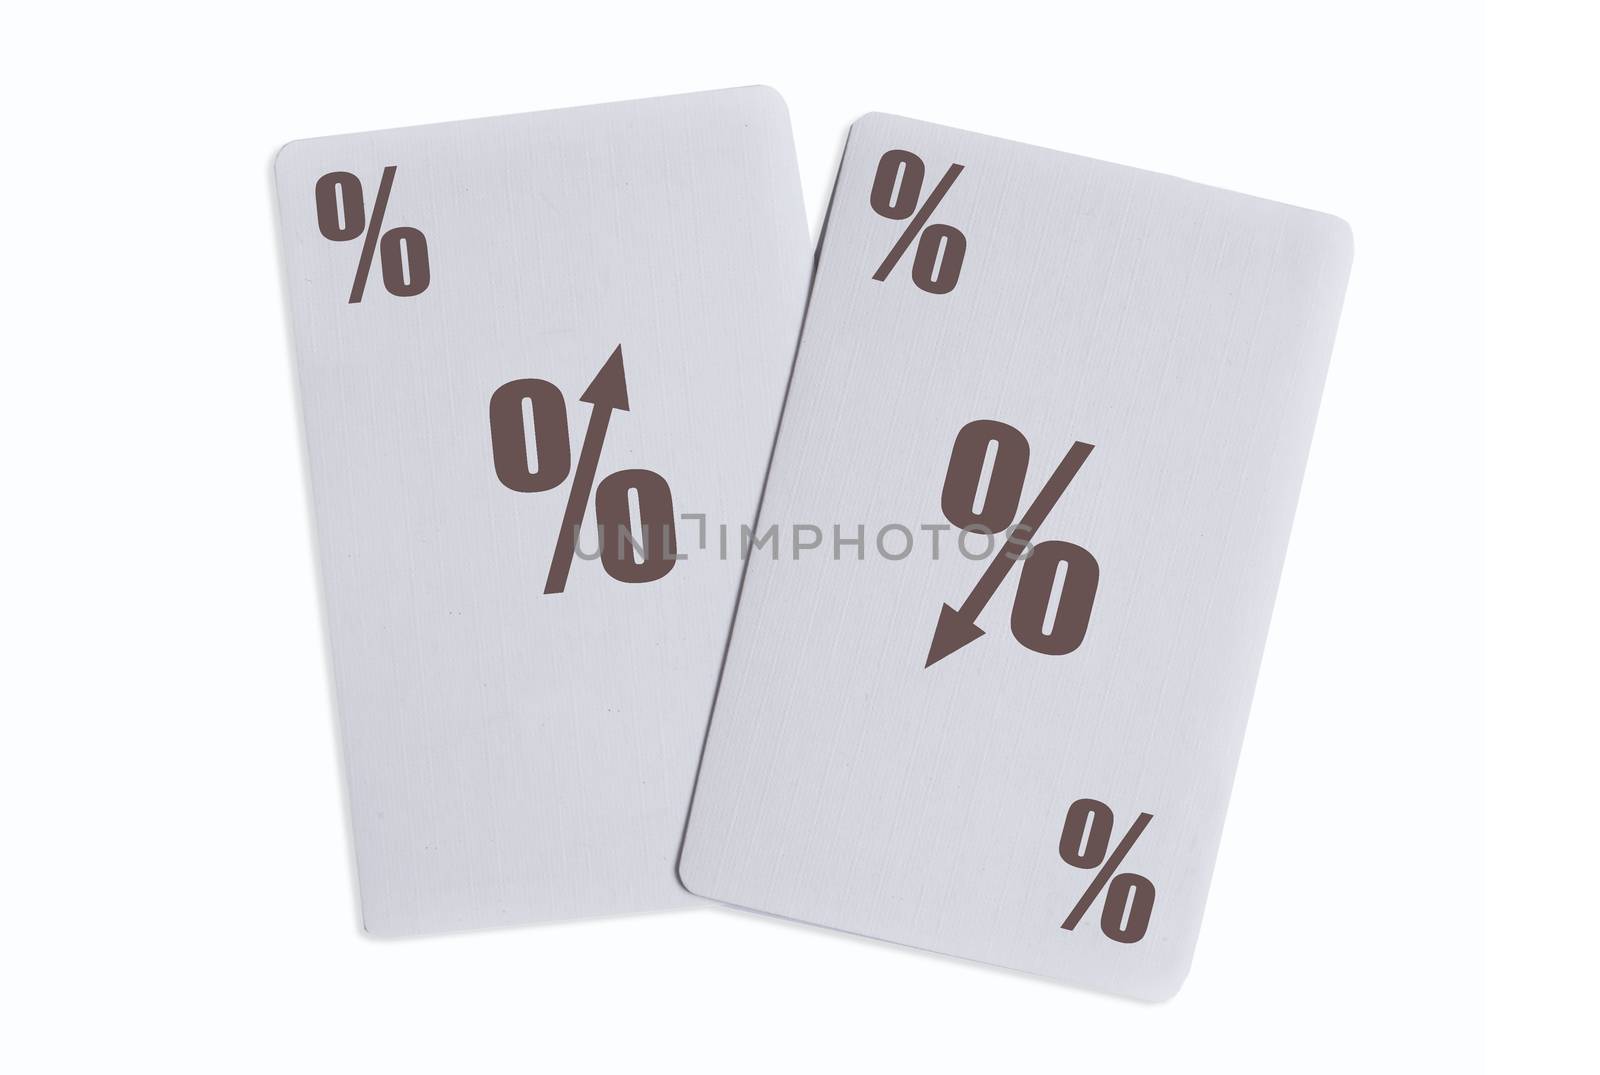 Playing cards with up and down interest rate signs